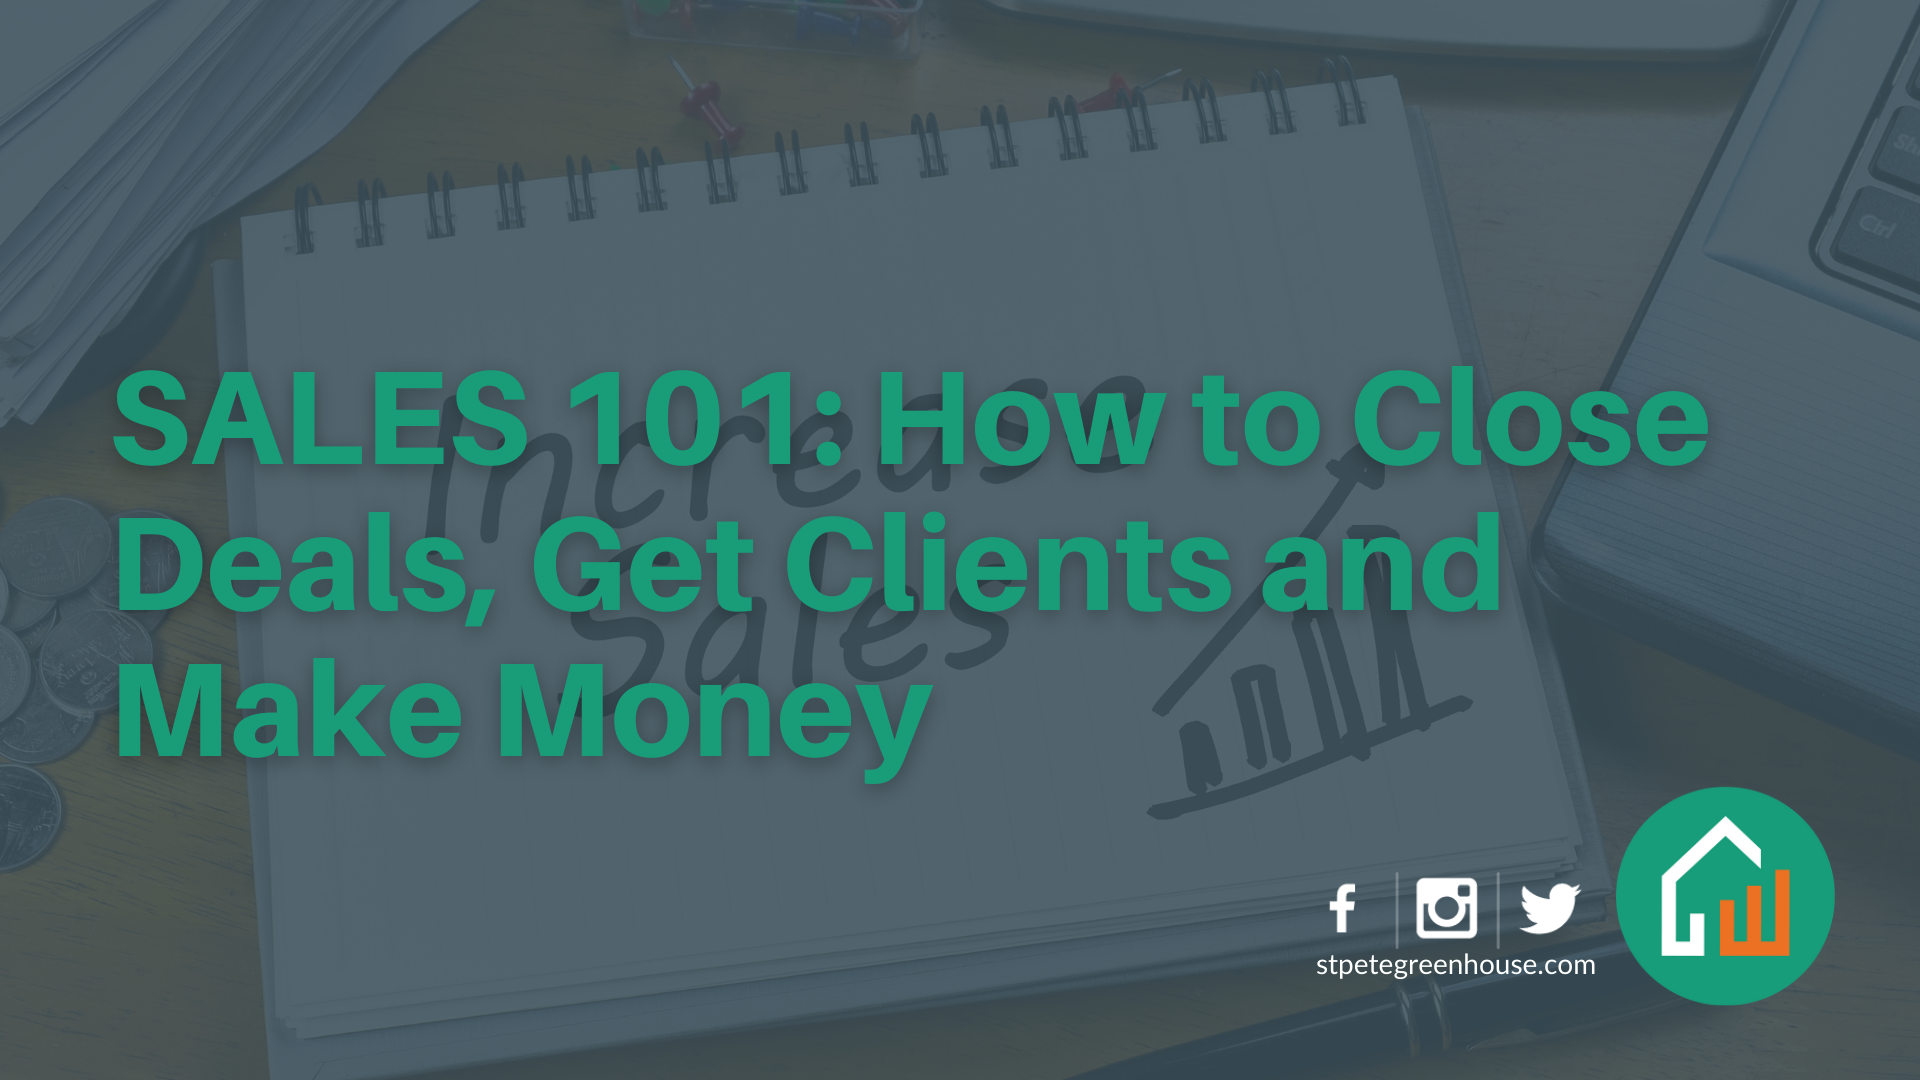 Sales 101: How to Close Deals, Get Clients, and Make Money-image